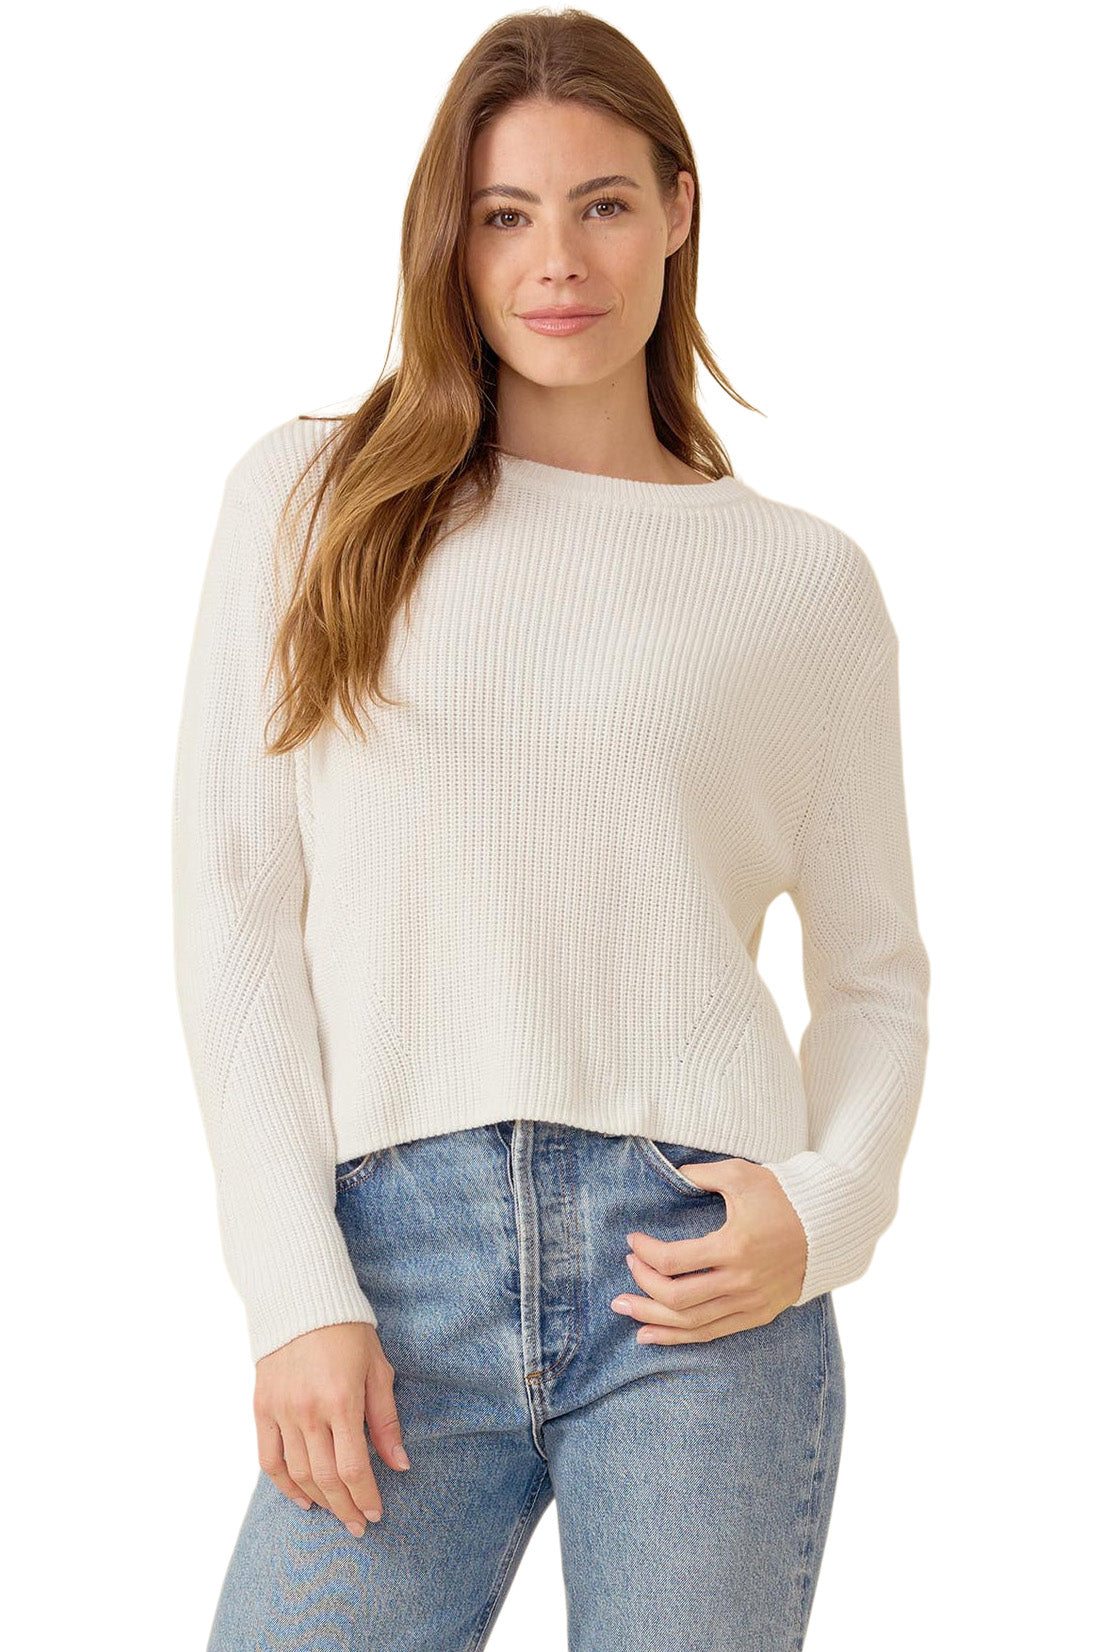 One Grey Day Orson Crewneck Pullover in Ivory